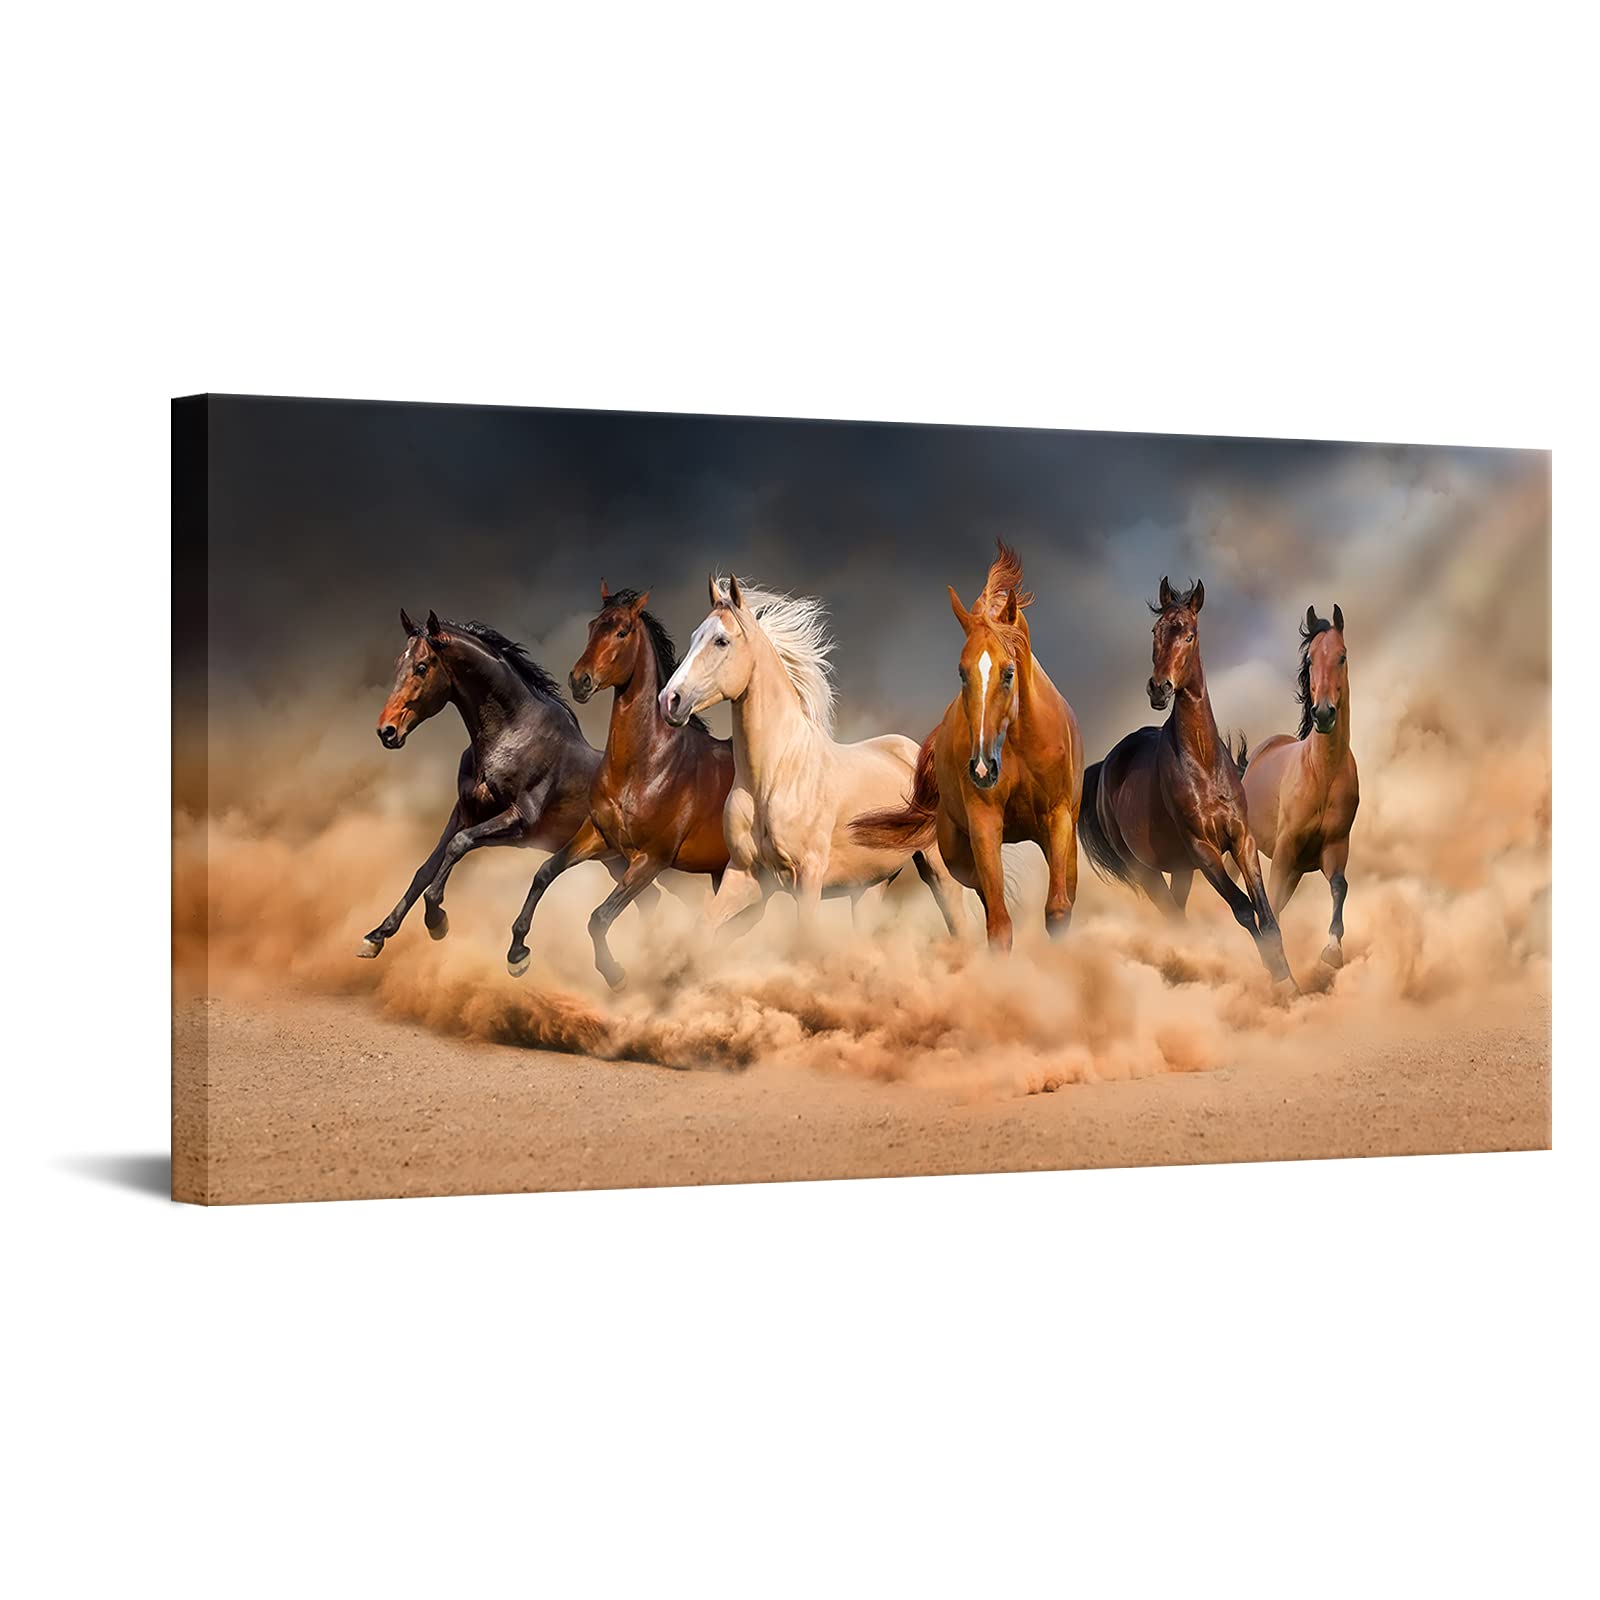 LevvArts - Large Size Running Horse Canvas Wall Art,Wild Animal Picture Print on Canvas,Framed Gallery Wrapped,Modern Home and O